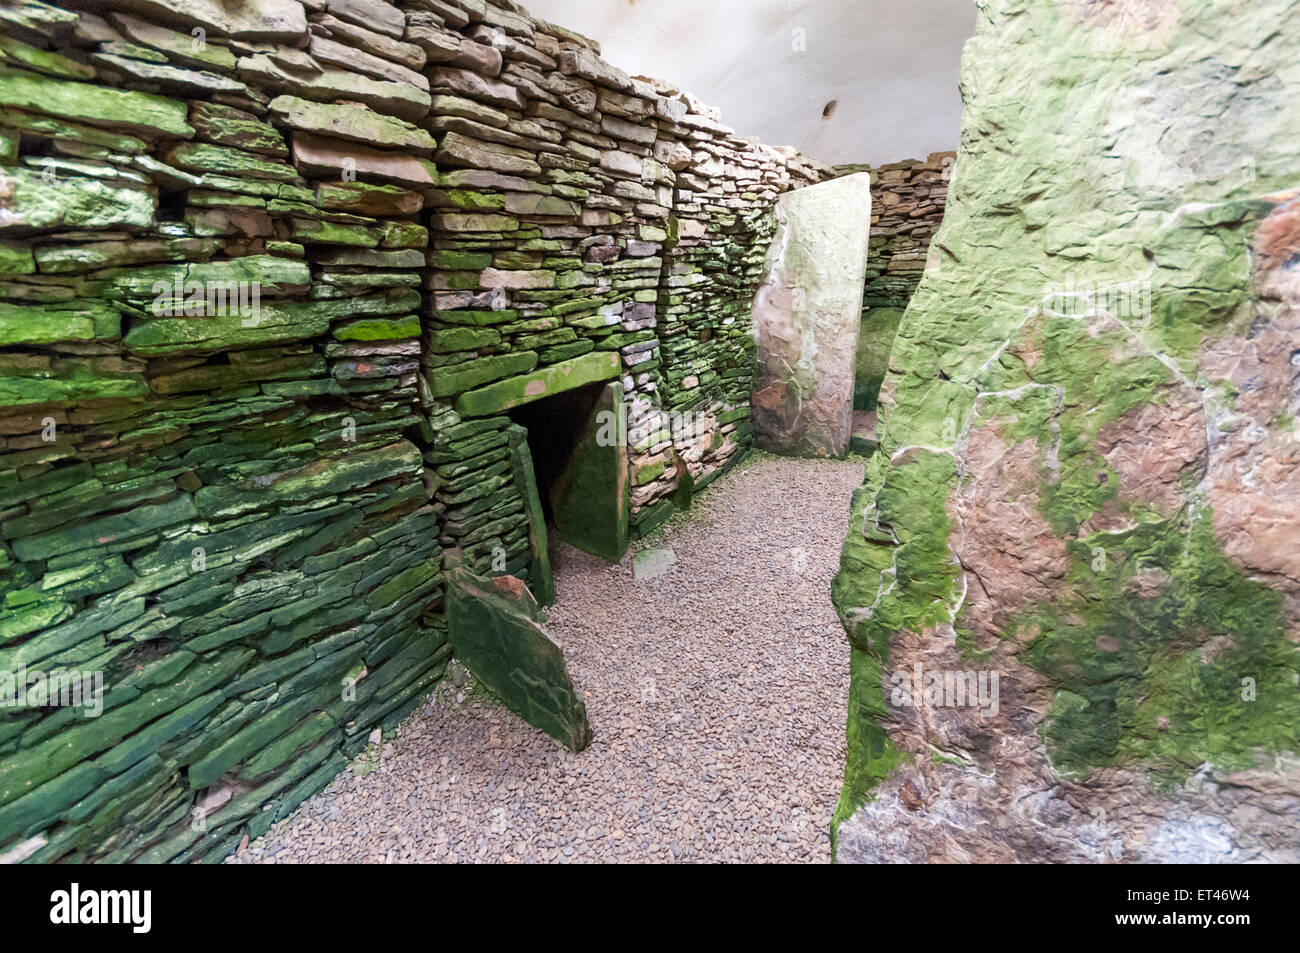 The interior of the chambered tomb of Unstan on Orkney Mainland. Stock Photo